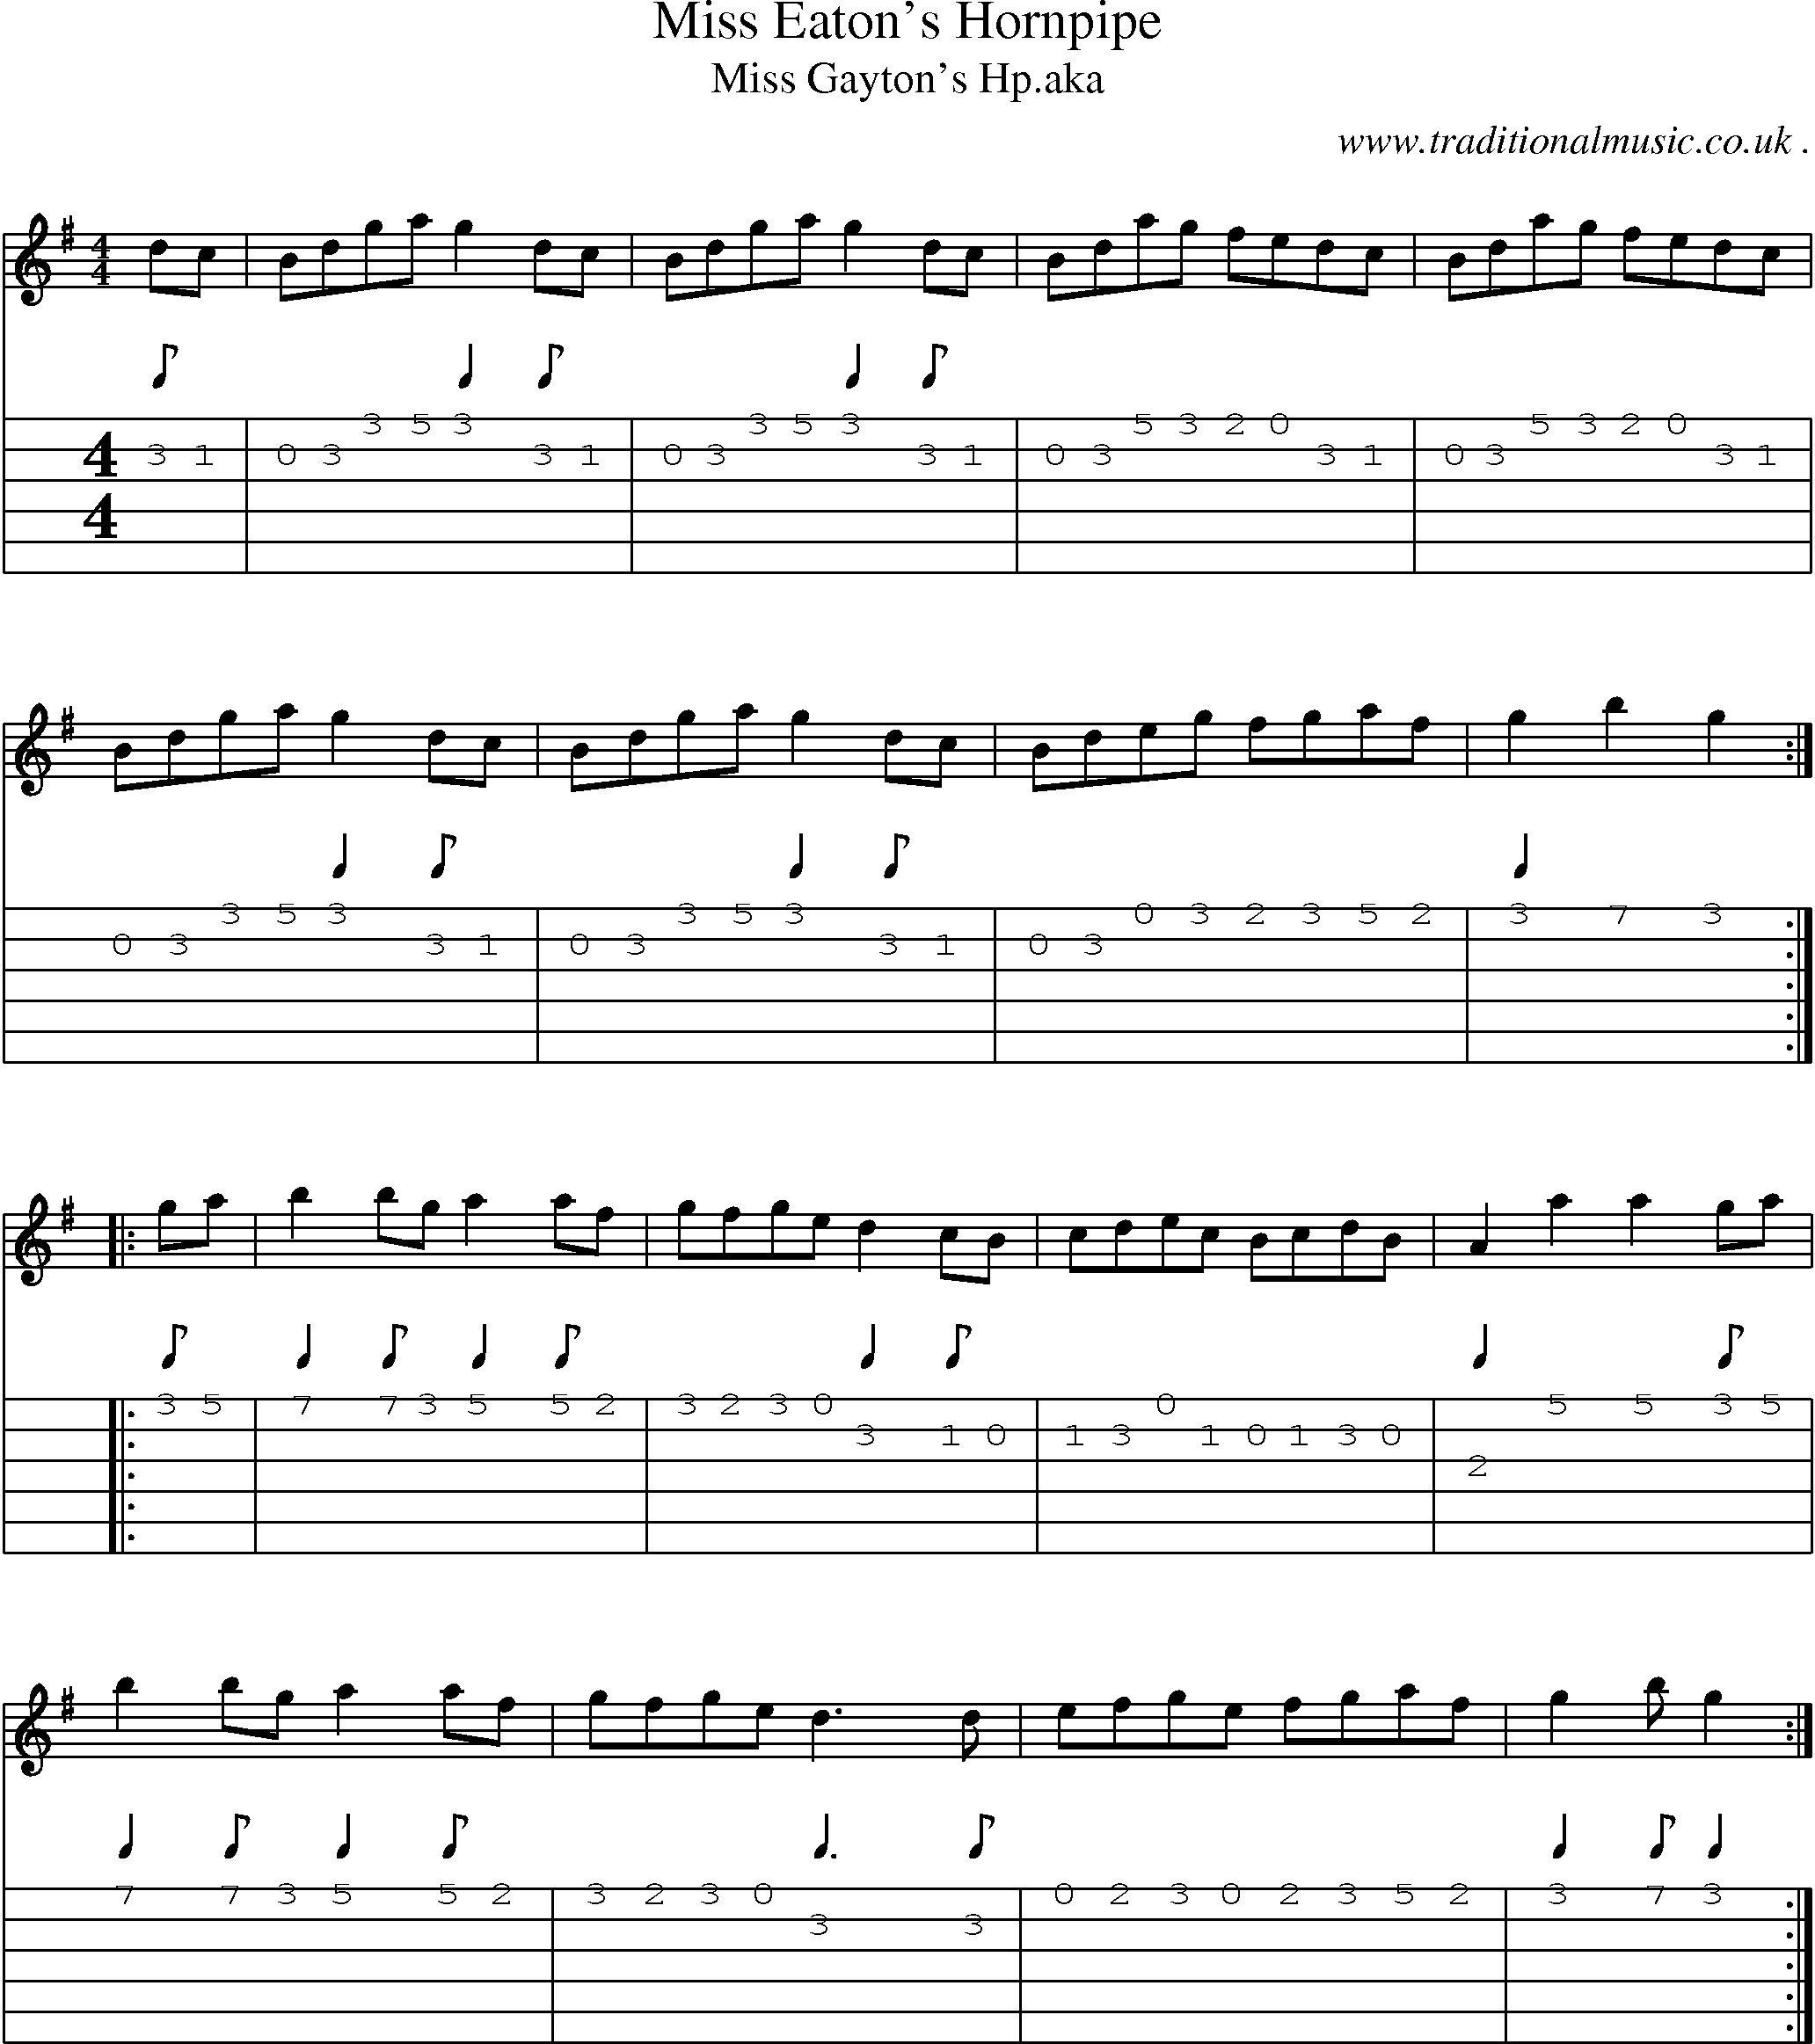 Sheet-Music and Guitar Tabs for Miss Eatons Hornpipe